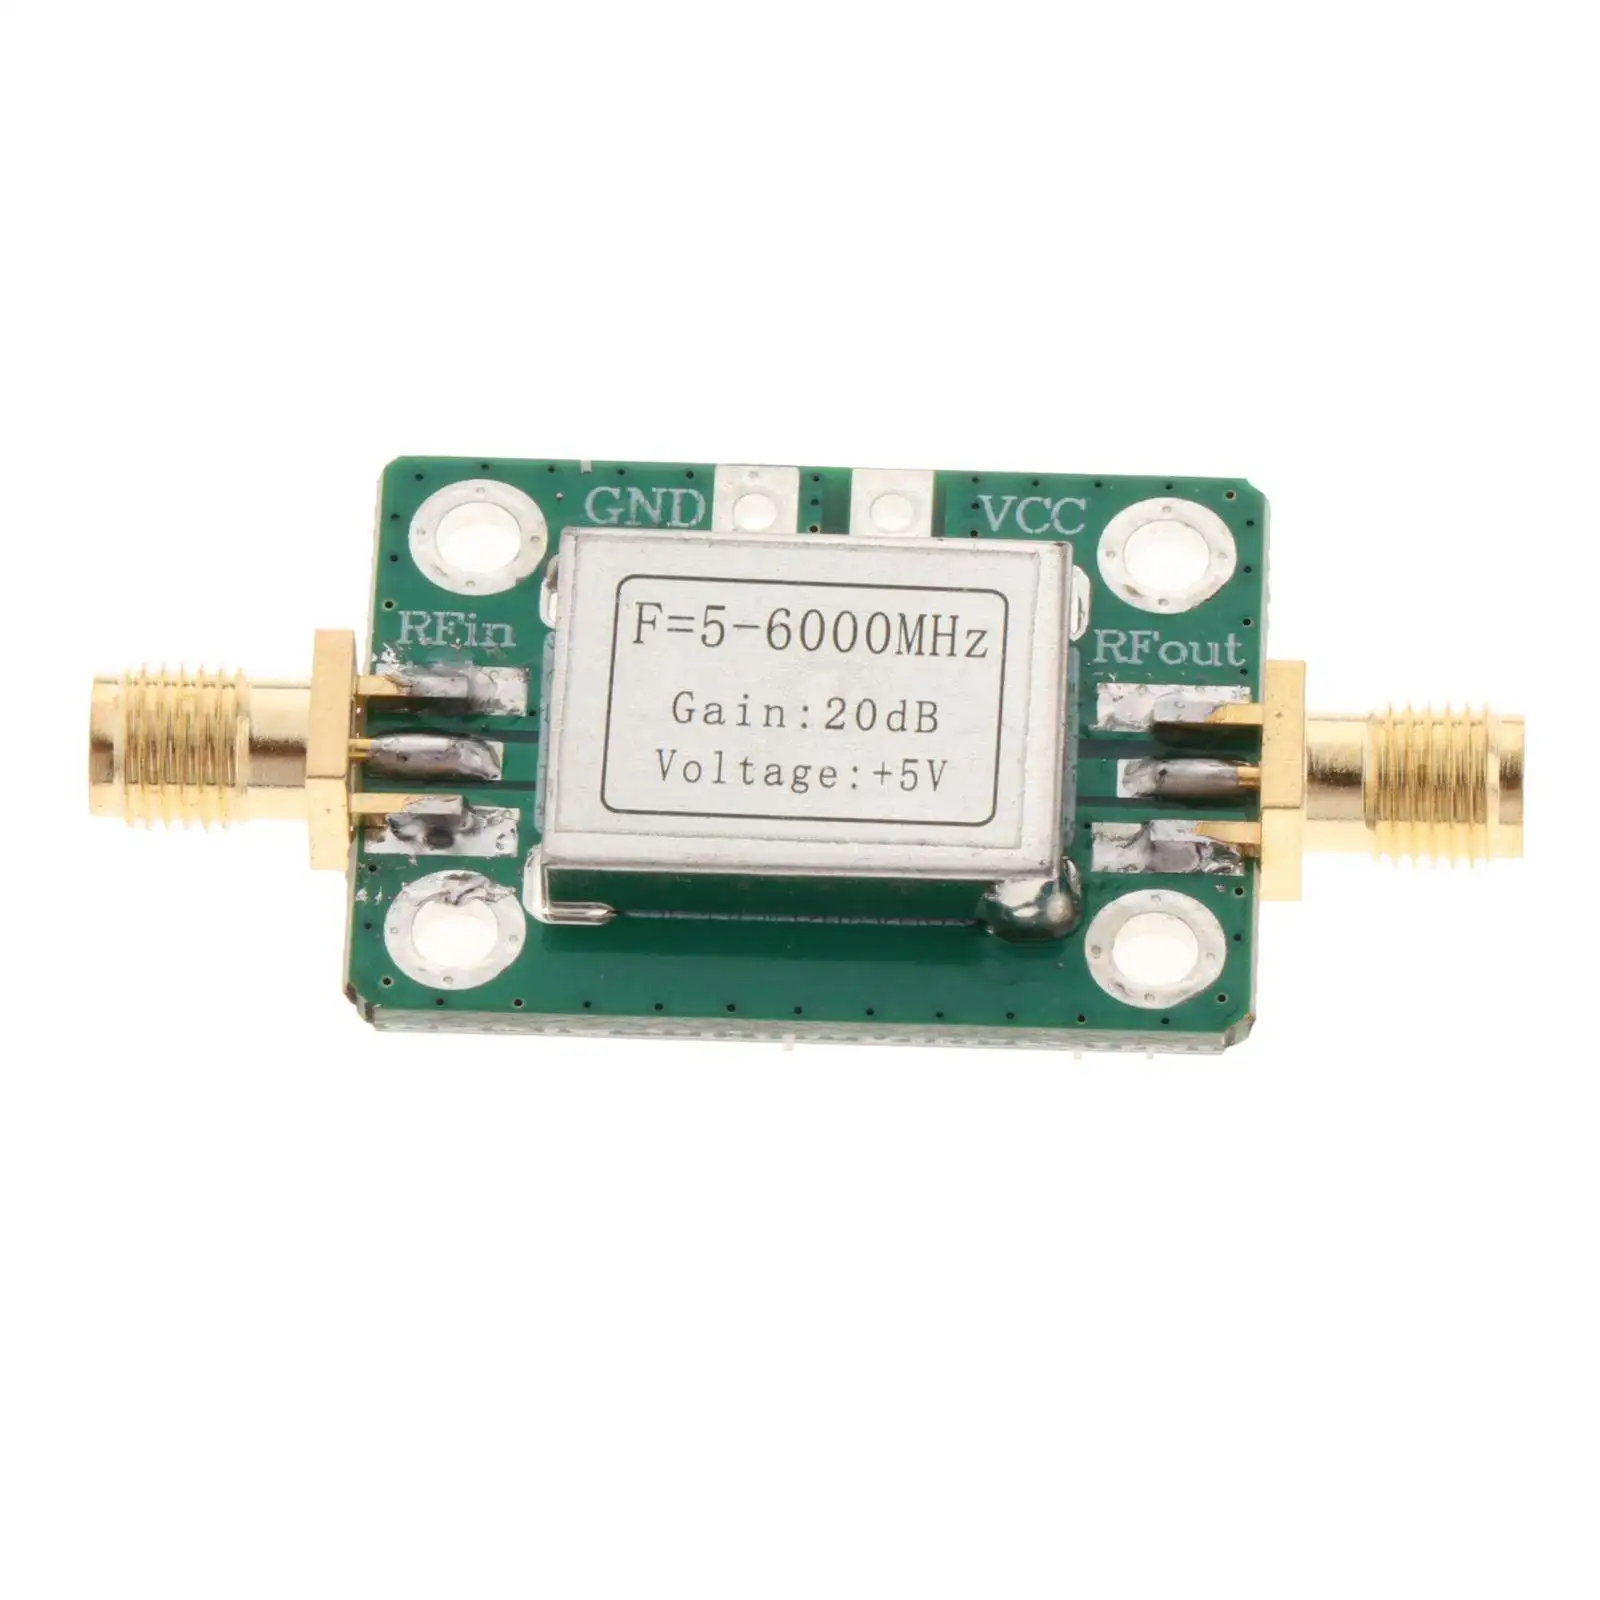 5--6000MHz RF Larger Dynamic Range Wider Operating Frequency Scope Signal Power Amplifier for Various RF Receive Front-End